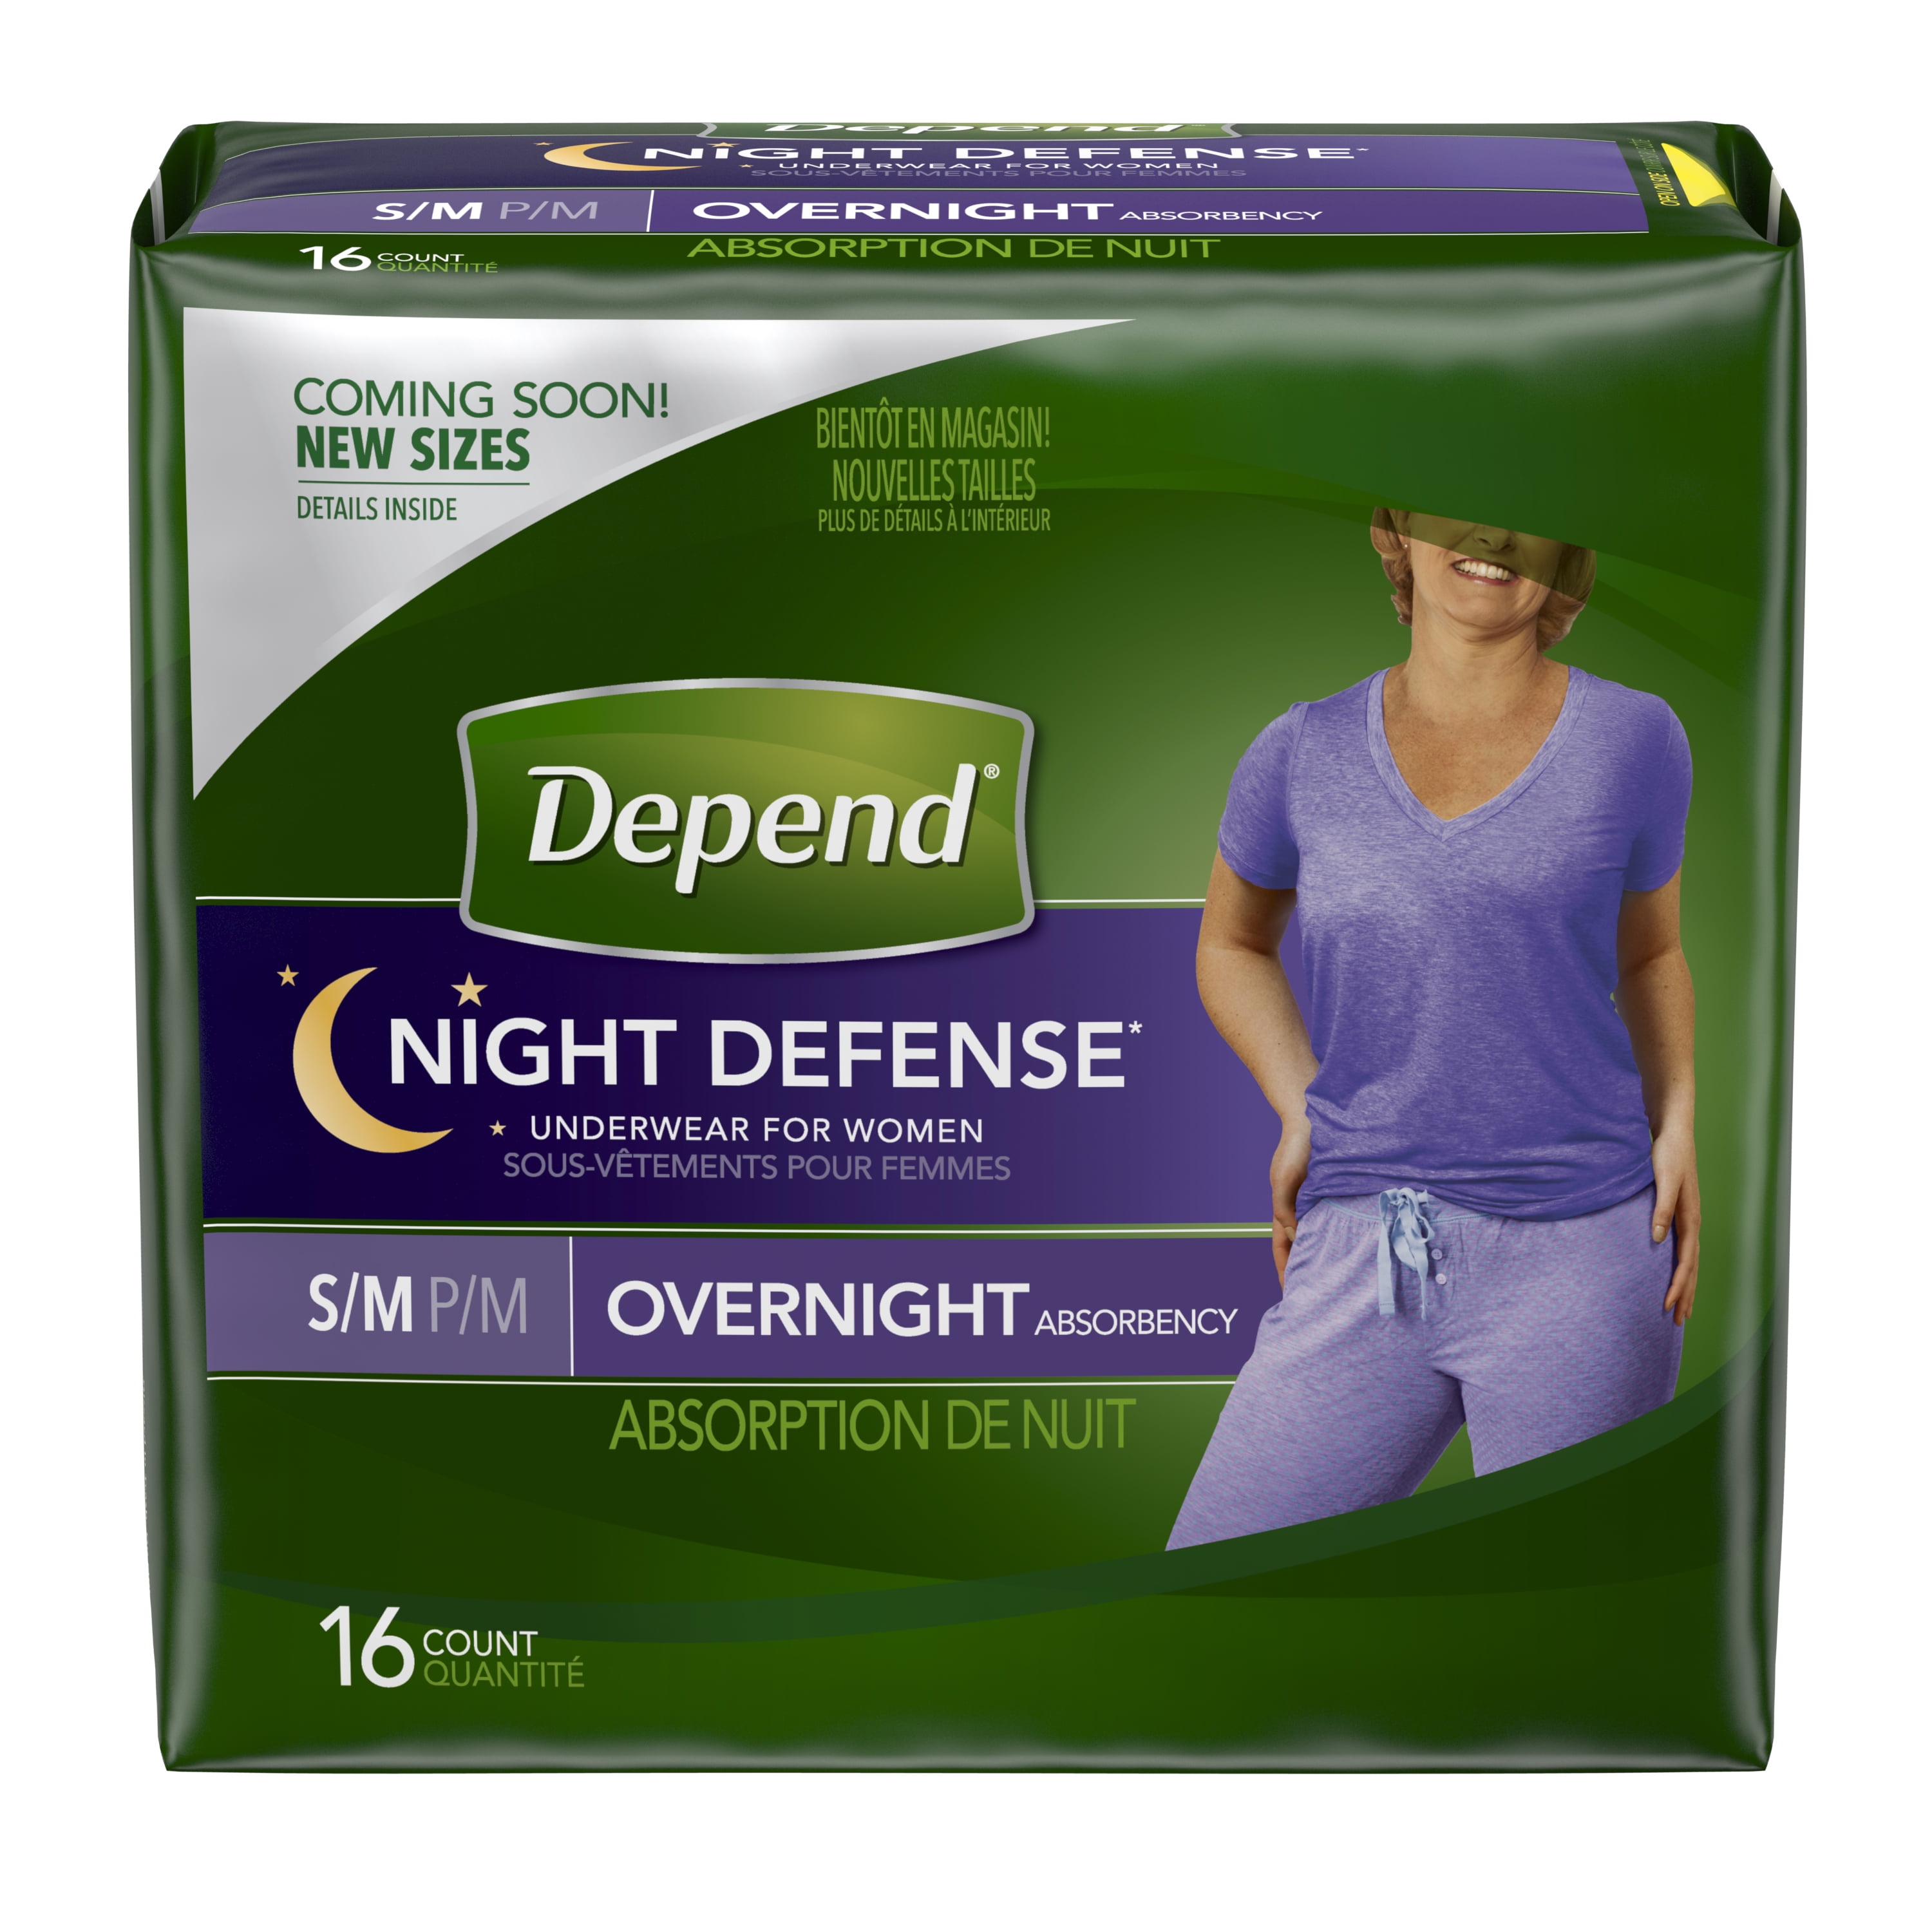 Depend Night Defense Incontinence Overnight Underwear for Women, S/M, 16  Count